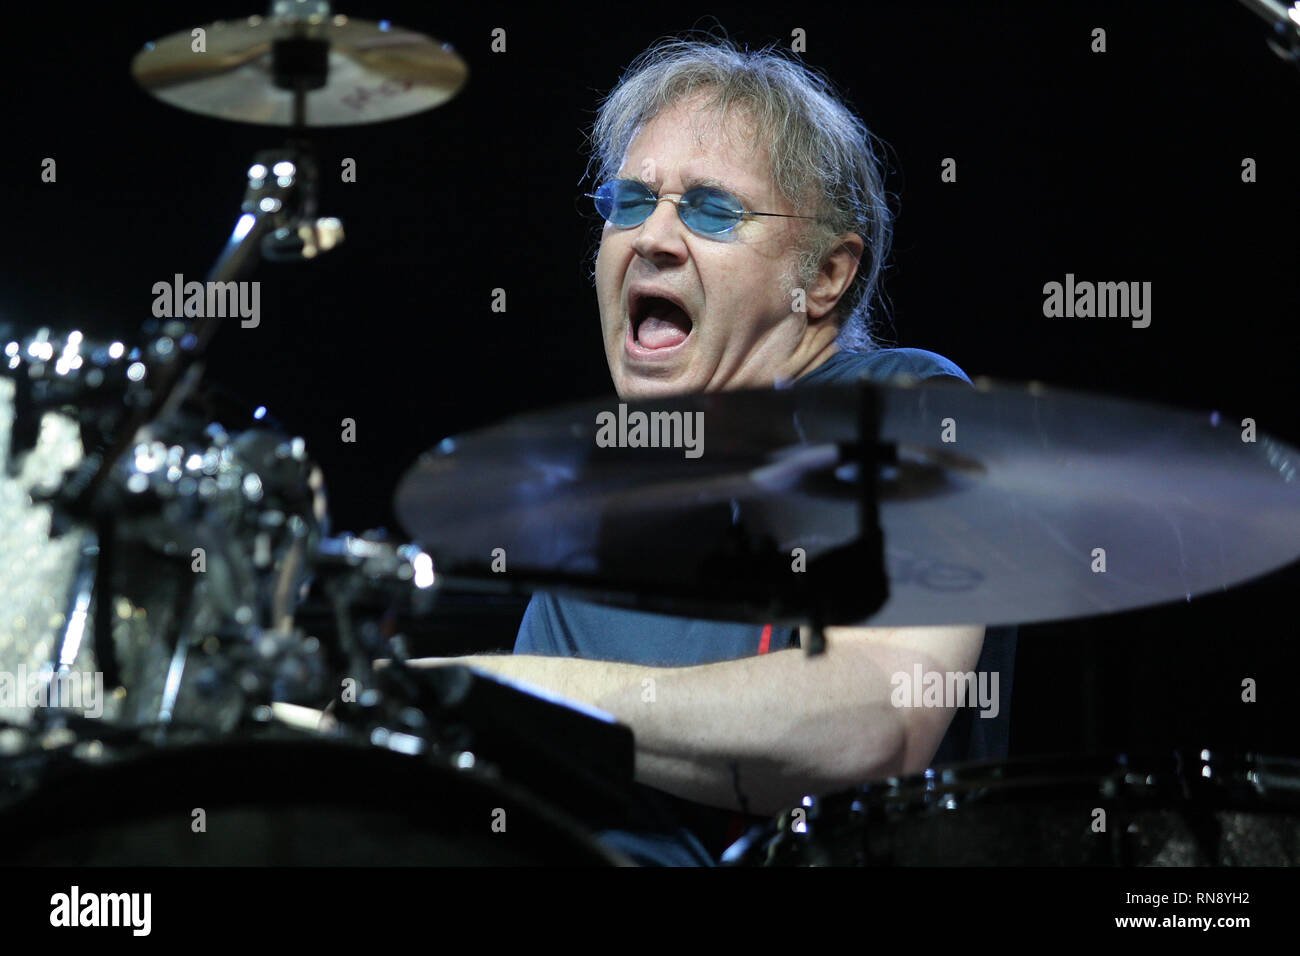 Deep Purple drummer Ian Paice is shown performing on stage during a 'live' concert appearance. Stock Photo